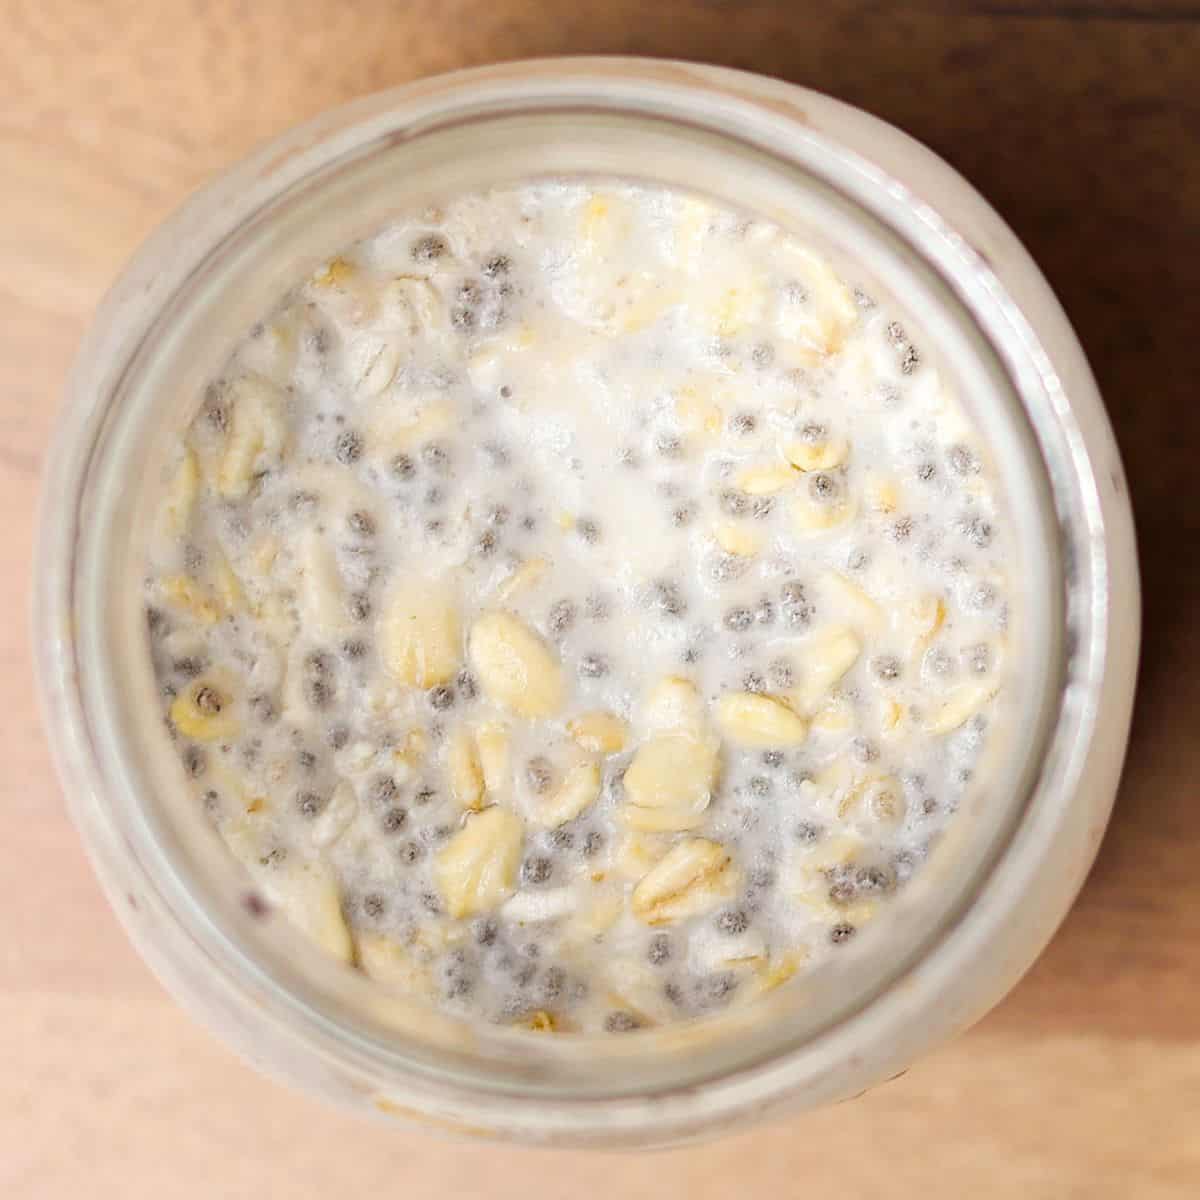 Overnight oats with coconut milk in a glass jar, soaked and ready after being refrigerated overnight, showing the thickened texture of the oats and chia mixture.